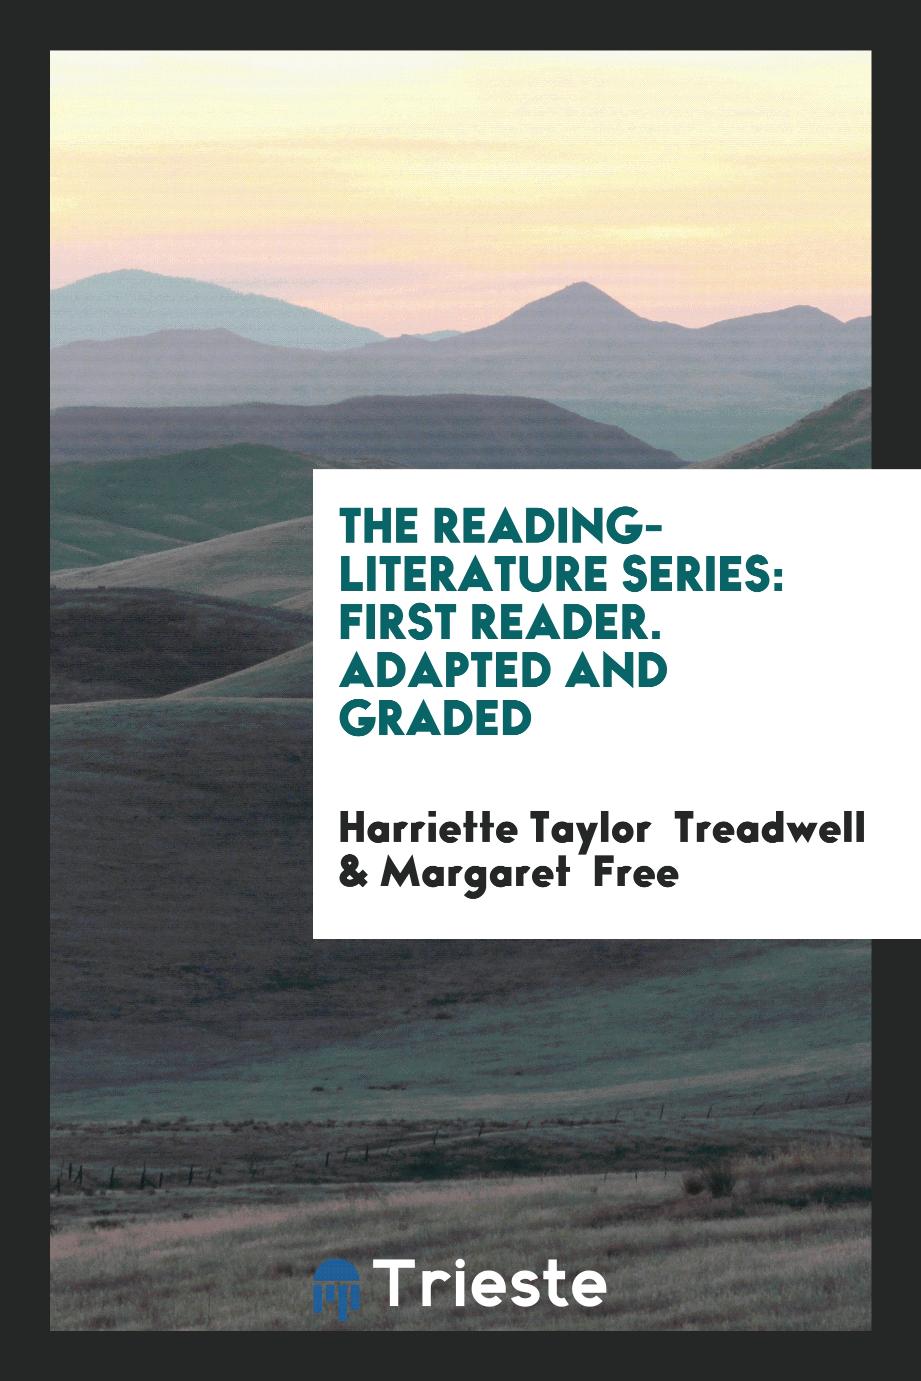 The Reading-Literature Series: First Reader. Adapted and Graded